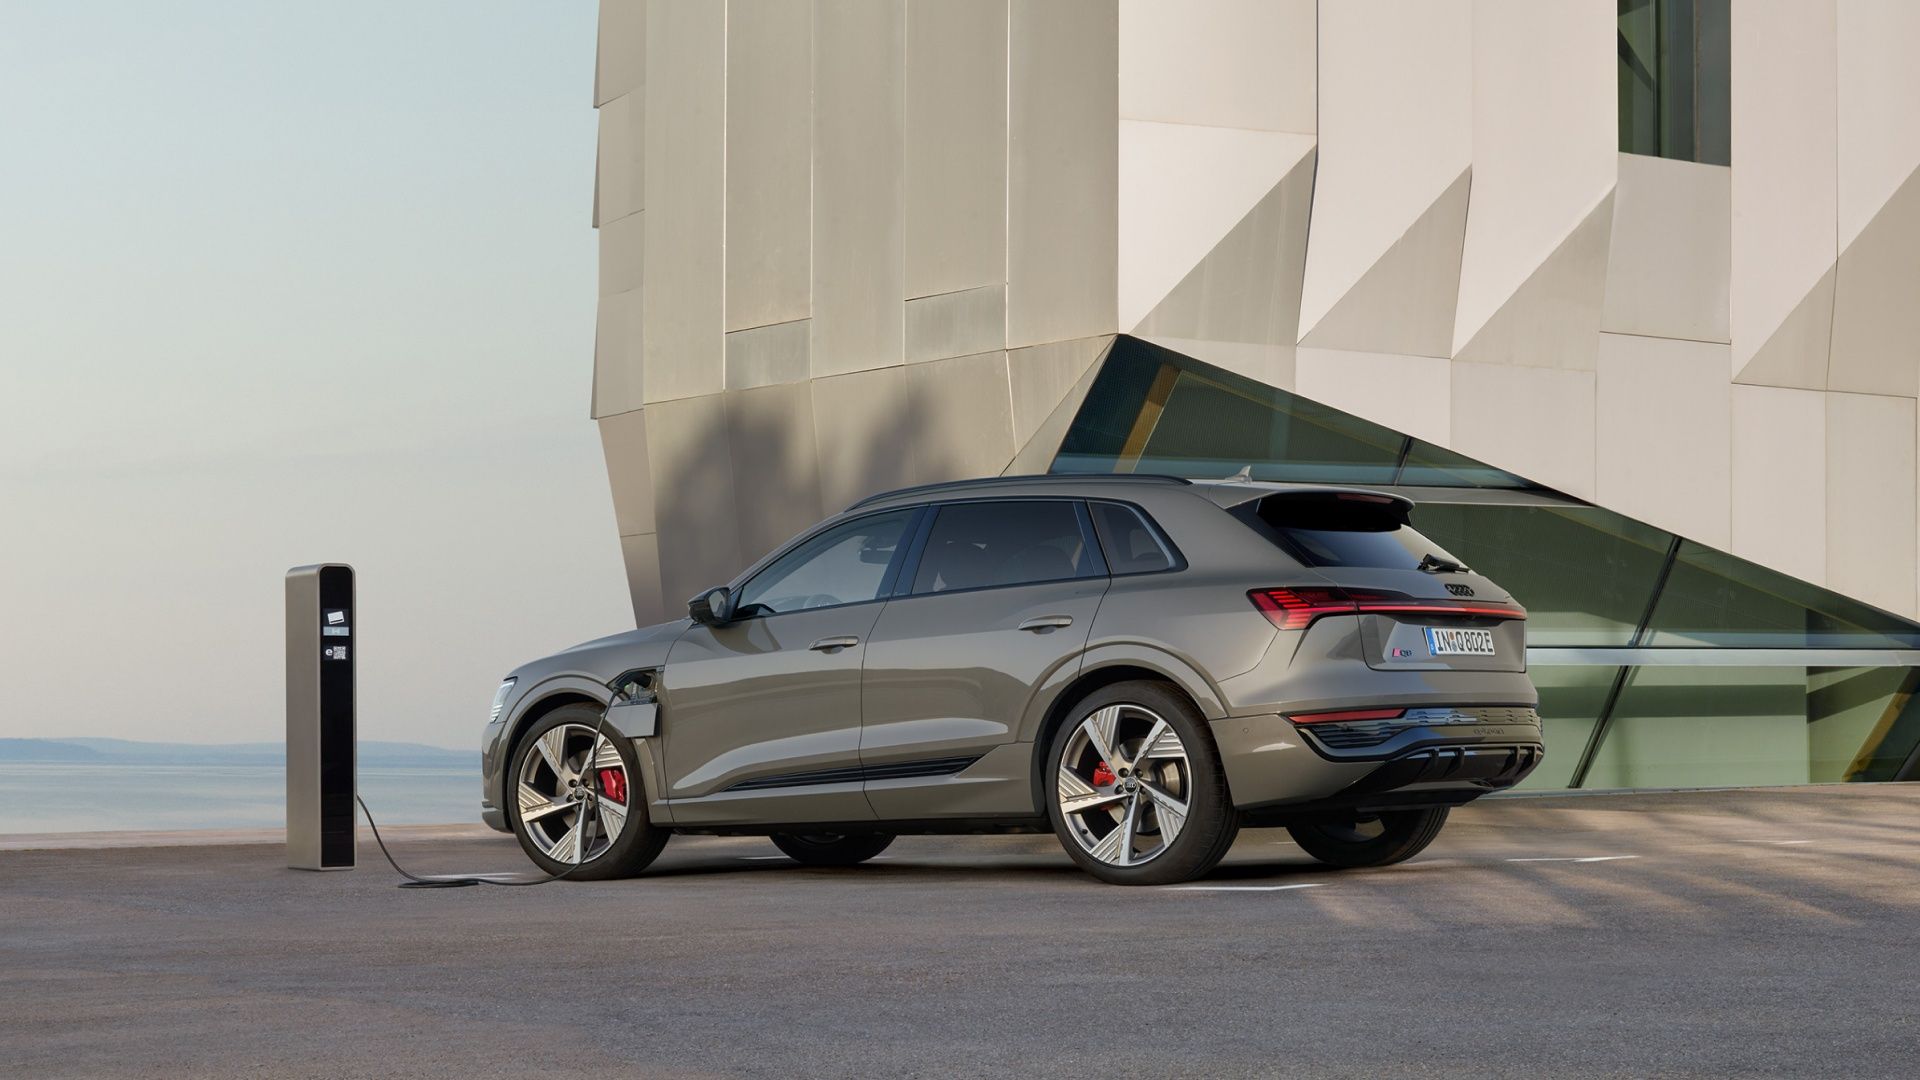 An Audi Q8 e-tron SUV charging in front of a building.